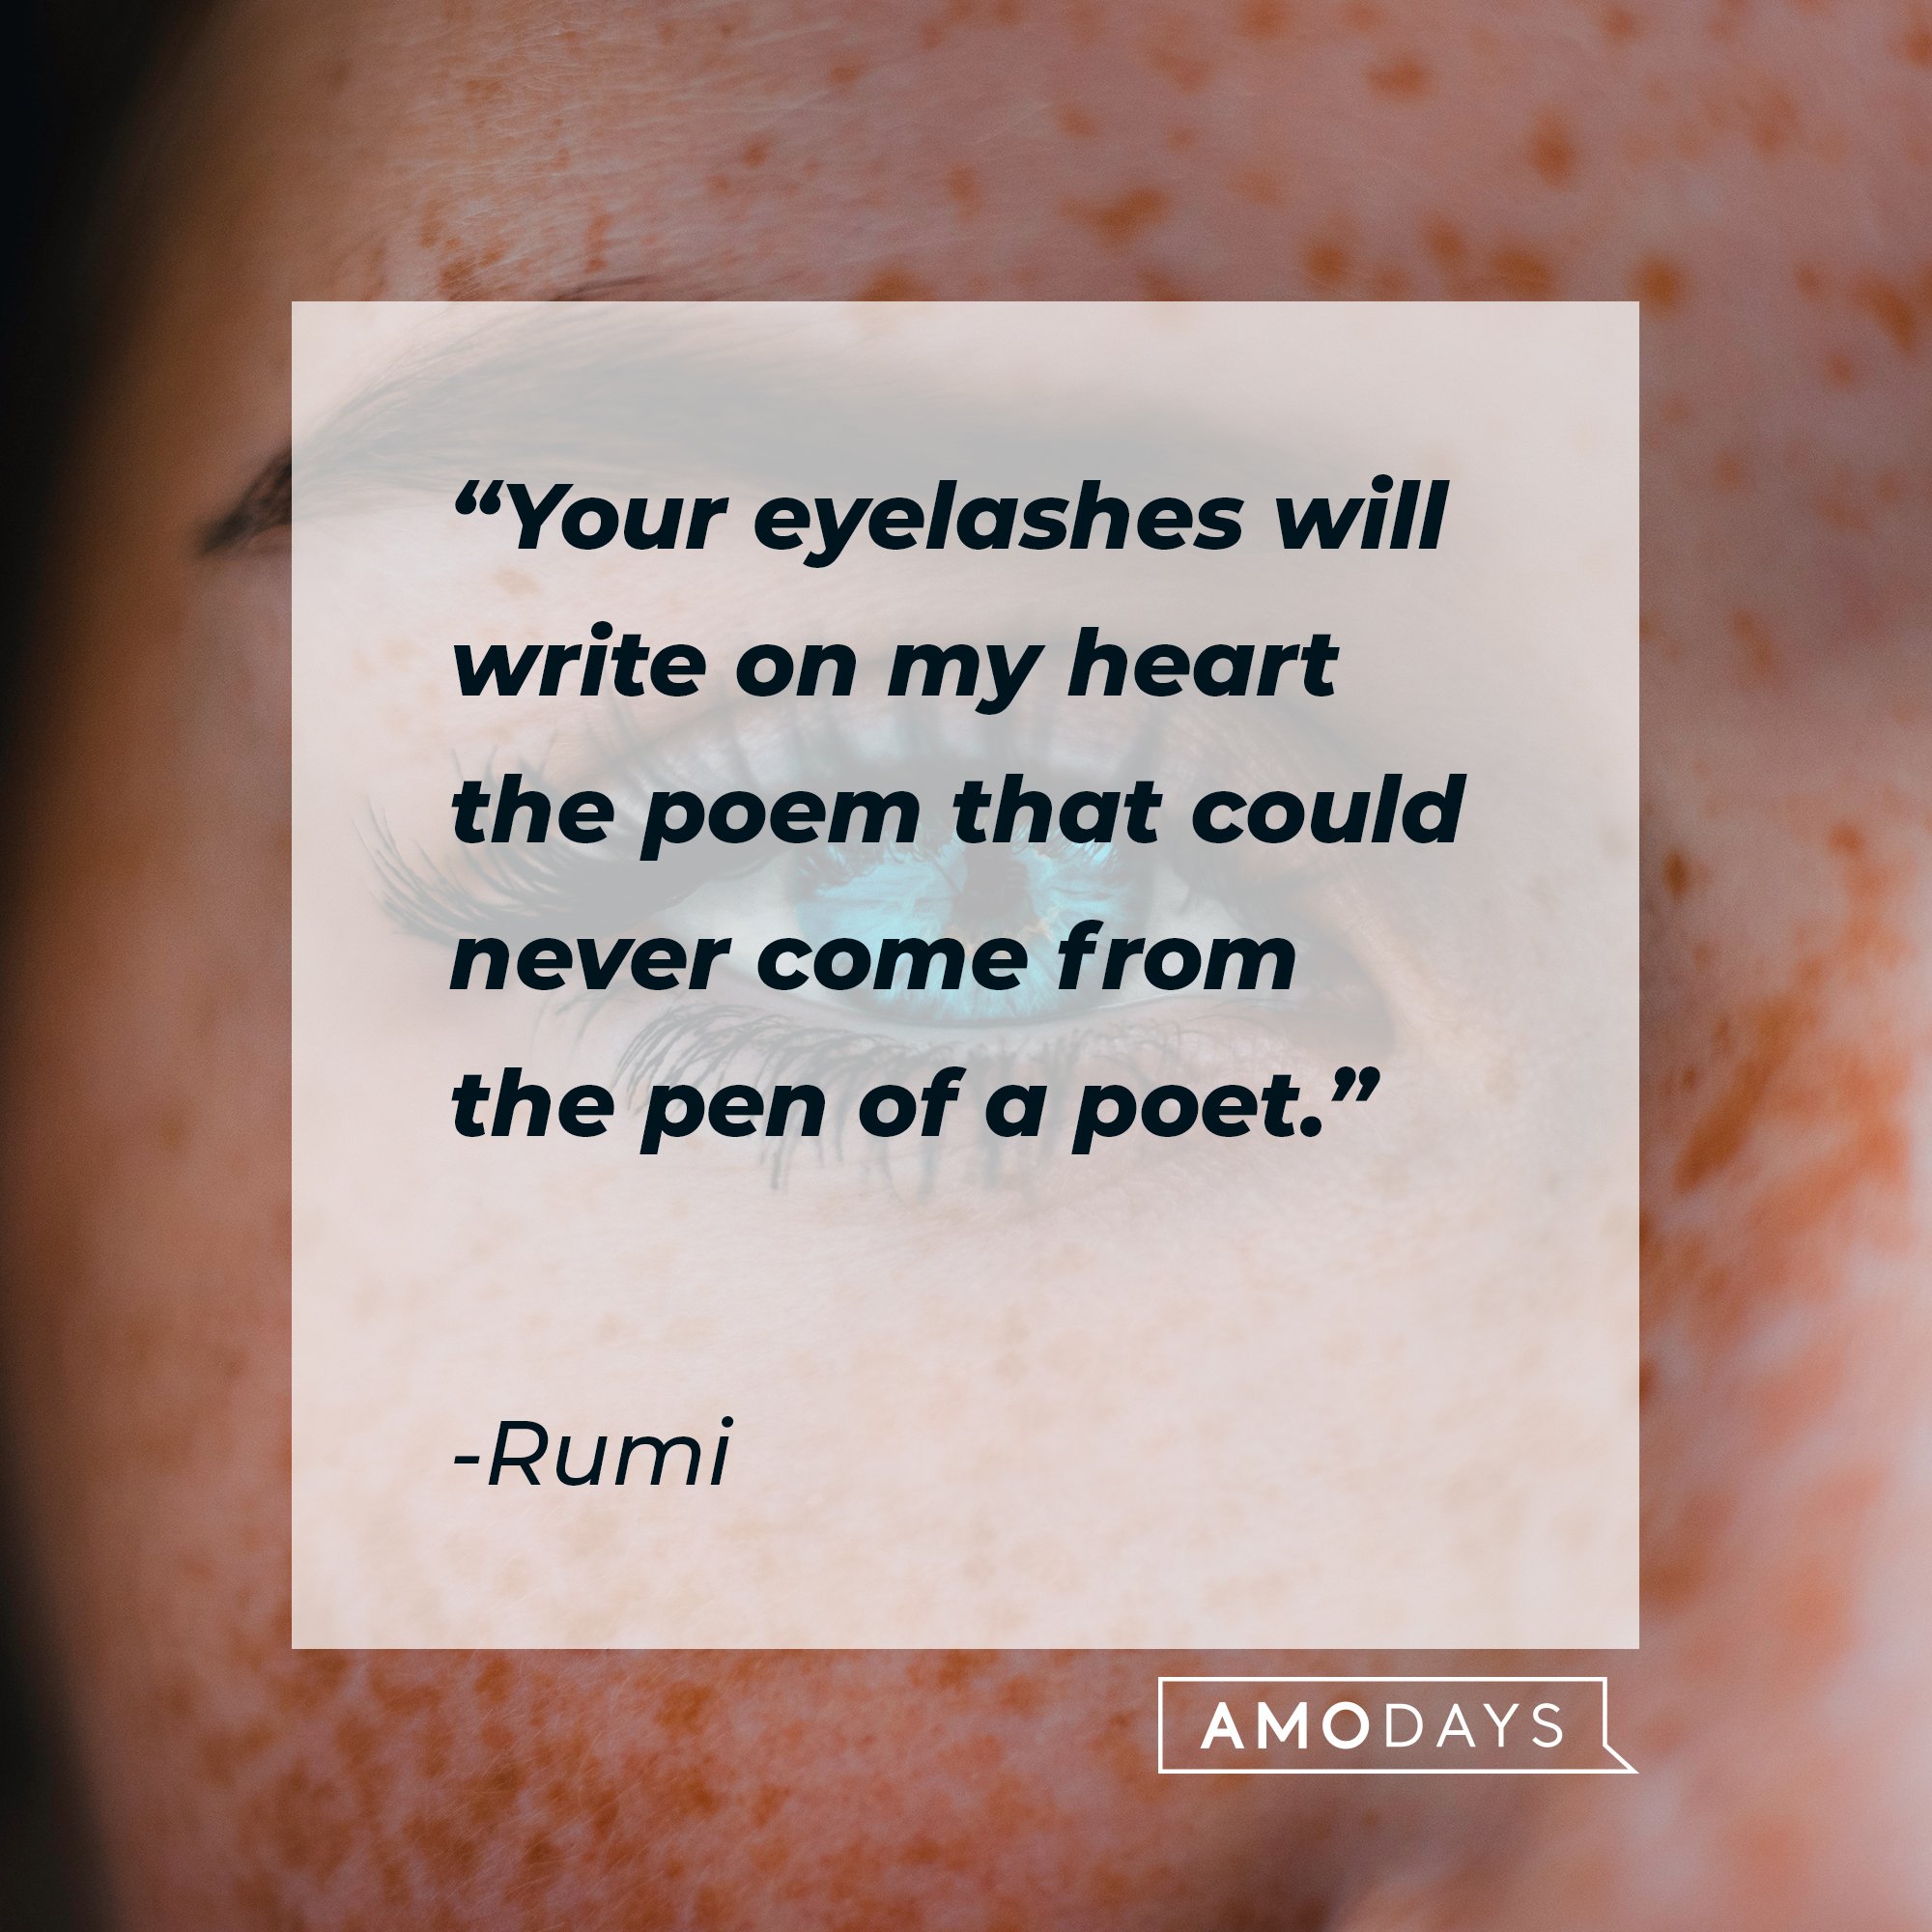  Rumi’s quote: "Your eyelashes will write on my heart the poem that could never come from the pen of a poet." | Image: AmoDays